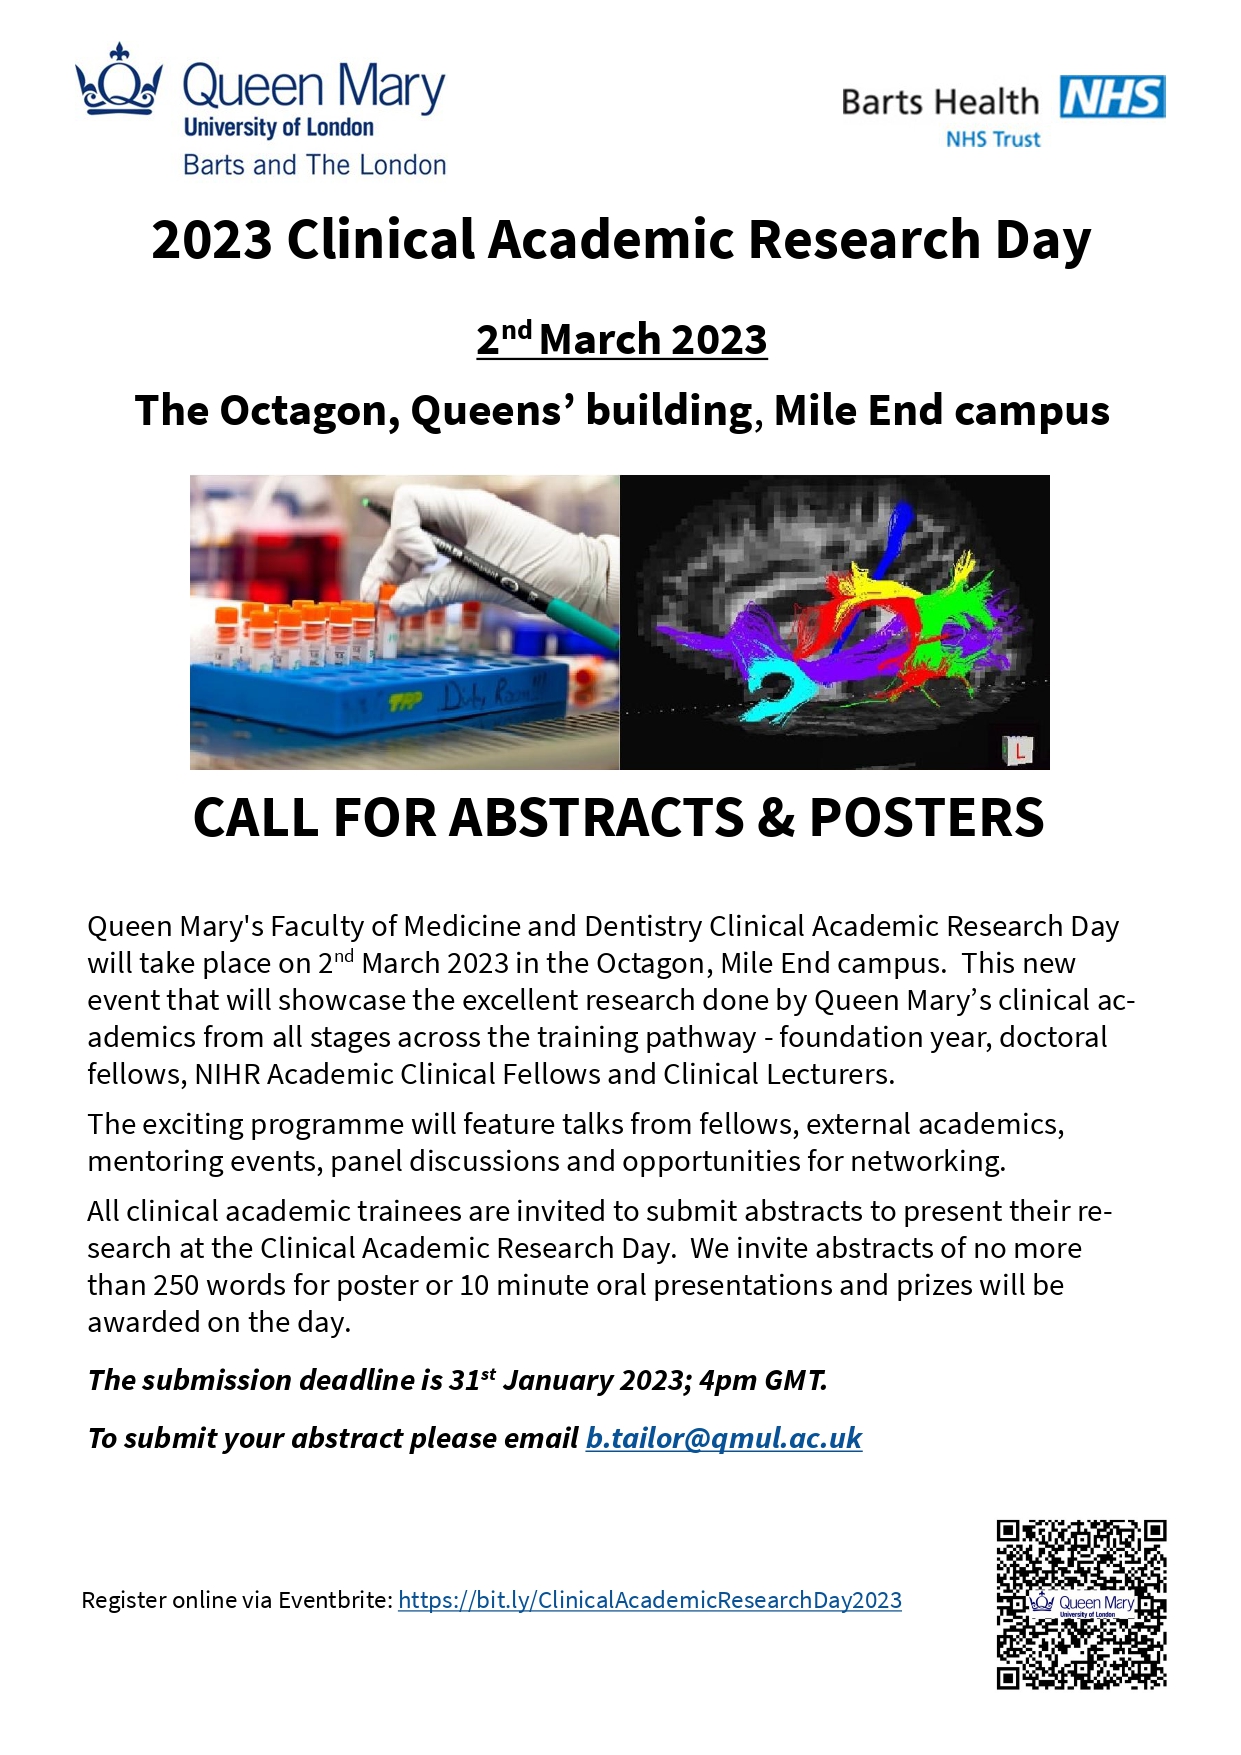 2023 Clinical Academic Research Day_Call for papers_flyer Text: Queen Mary's Faculty of Medicine and Dentistry Clinical Academic Research Day will take place on 2nd March 2023 in the Octagon, Mile End campus.  This new event that will showcase the excellent research done by Queen Mary’s clinical academics from all stages across the training pathway - foundation year, doctoral fellows, NIHR Academic Clinical Fellows and Clinical Lecturers.  The exciting programme will feature talks from fellows, external academics, mentoring events, panel discussions and opportunities for networking. All clinical academic trainees are invited to submit abstracts to present their research at the Clinical Academic Research Day.  We invite abstracts of no more than 250 words for poster or 10 minute oral presentations and prizes will be awarded on the day.  The submission deadline is 31st January 2023; 4pm GMT.    To submit your abstract please email b.tailor@qmul.ac.uk